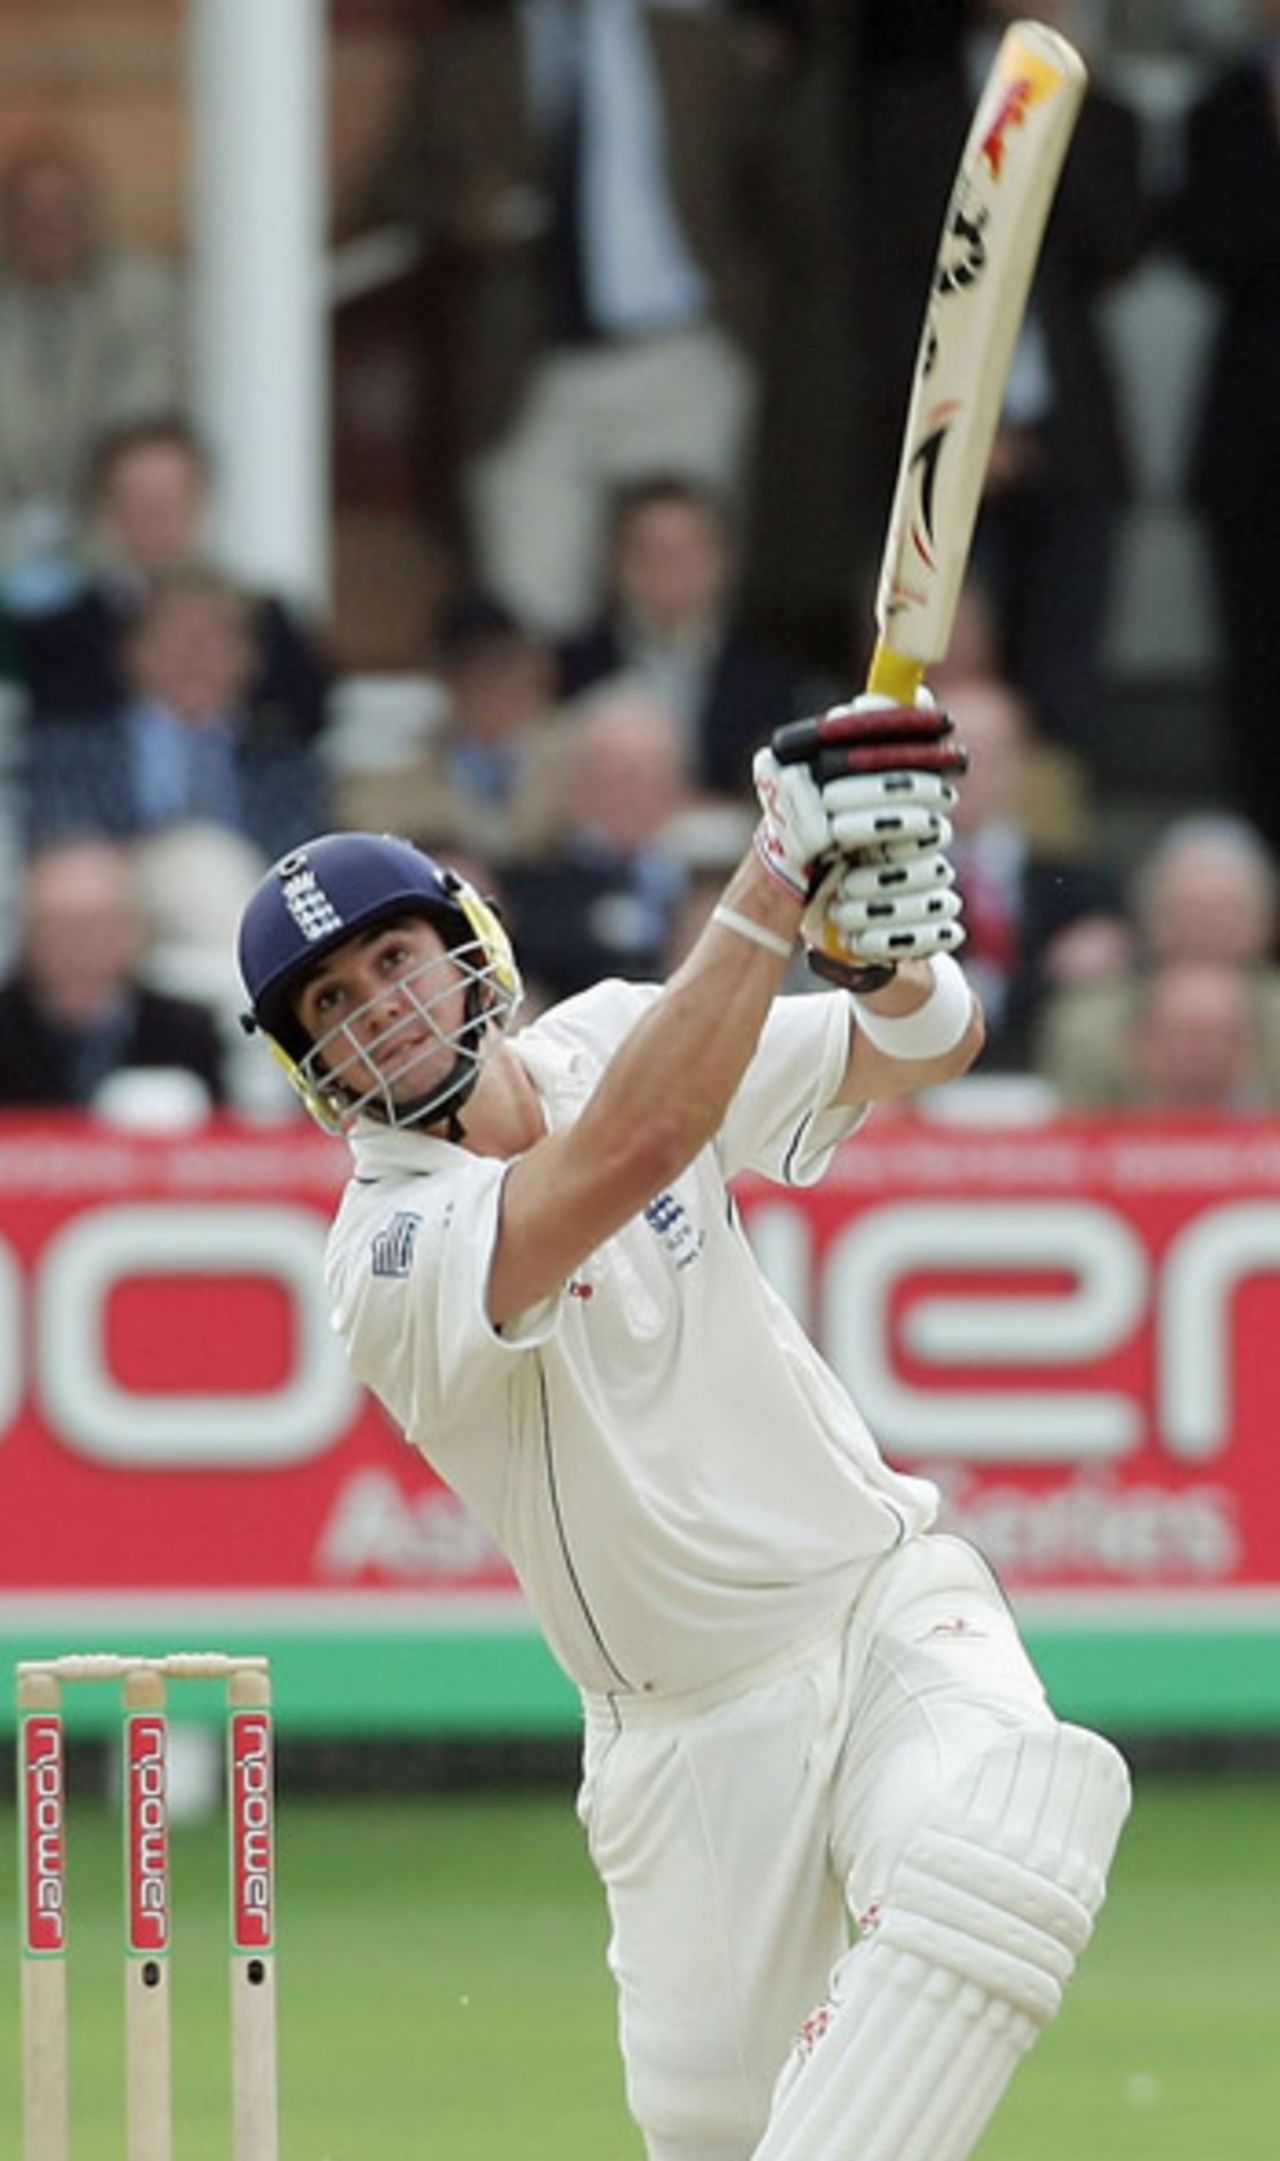 Kevin Pietersen hits out, England v Australia, Lord's, July 24, 2005